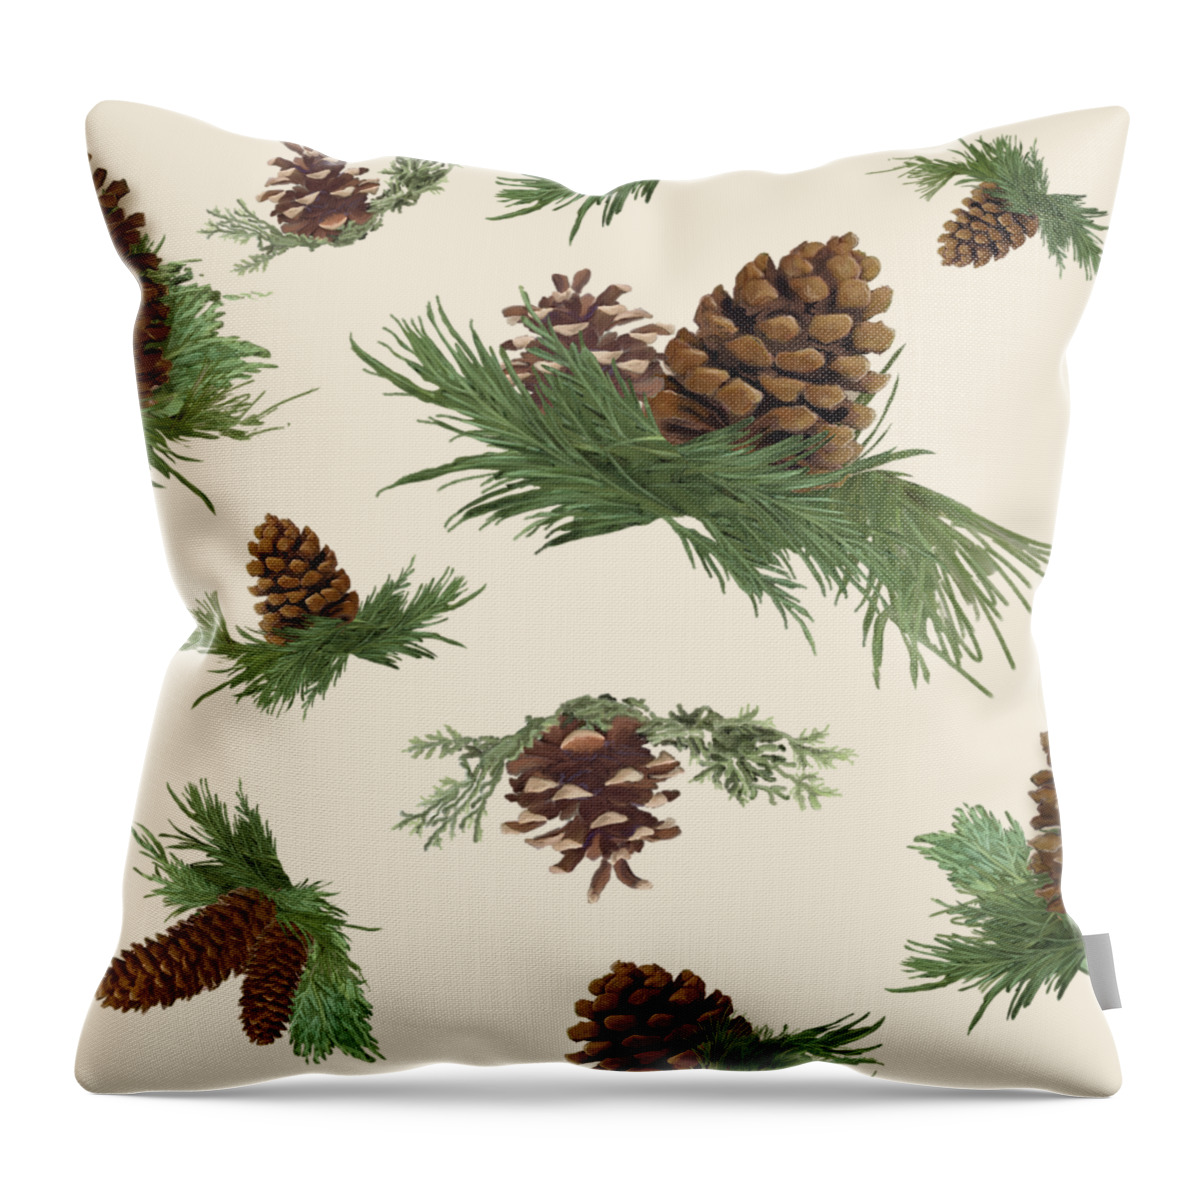 Pine Cones Throw Pillow featuring the painting Mountain Lodge Cabin in the Forest - Home Decor Pine Cones by Audrey Jeanne Roberts